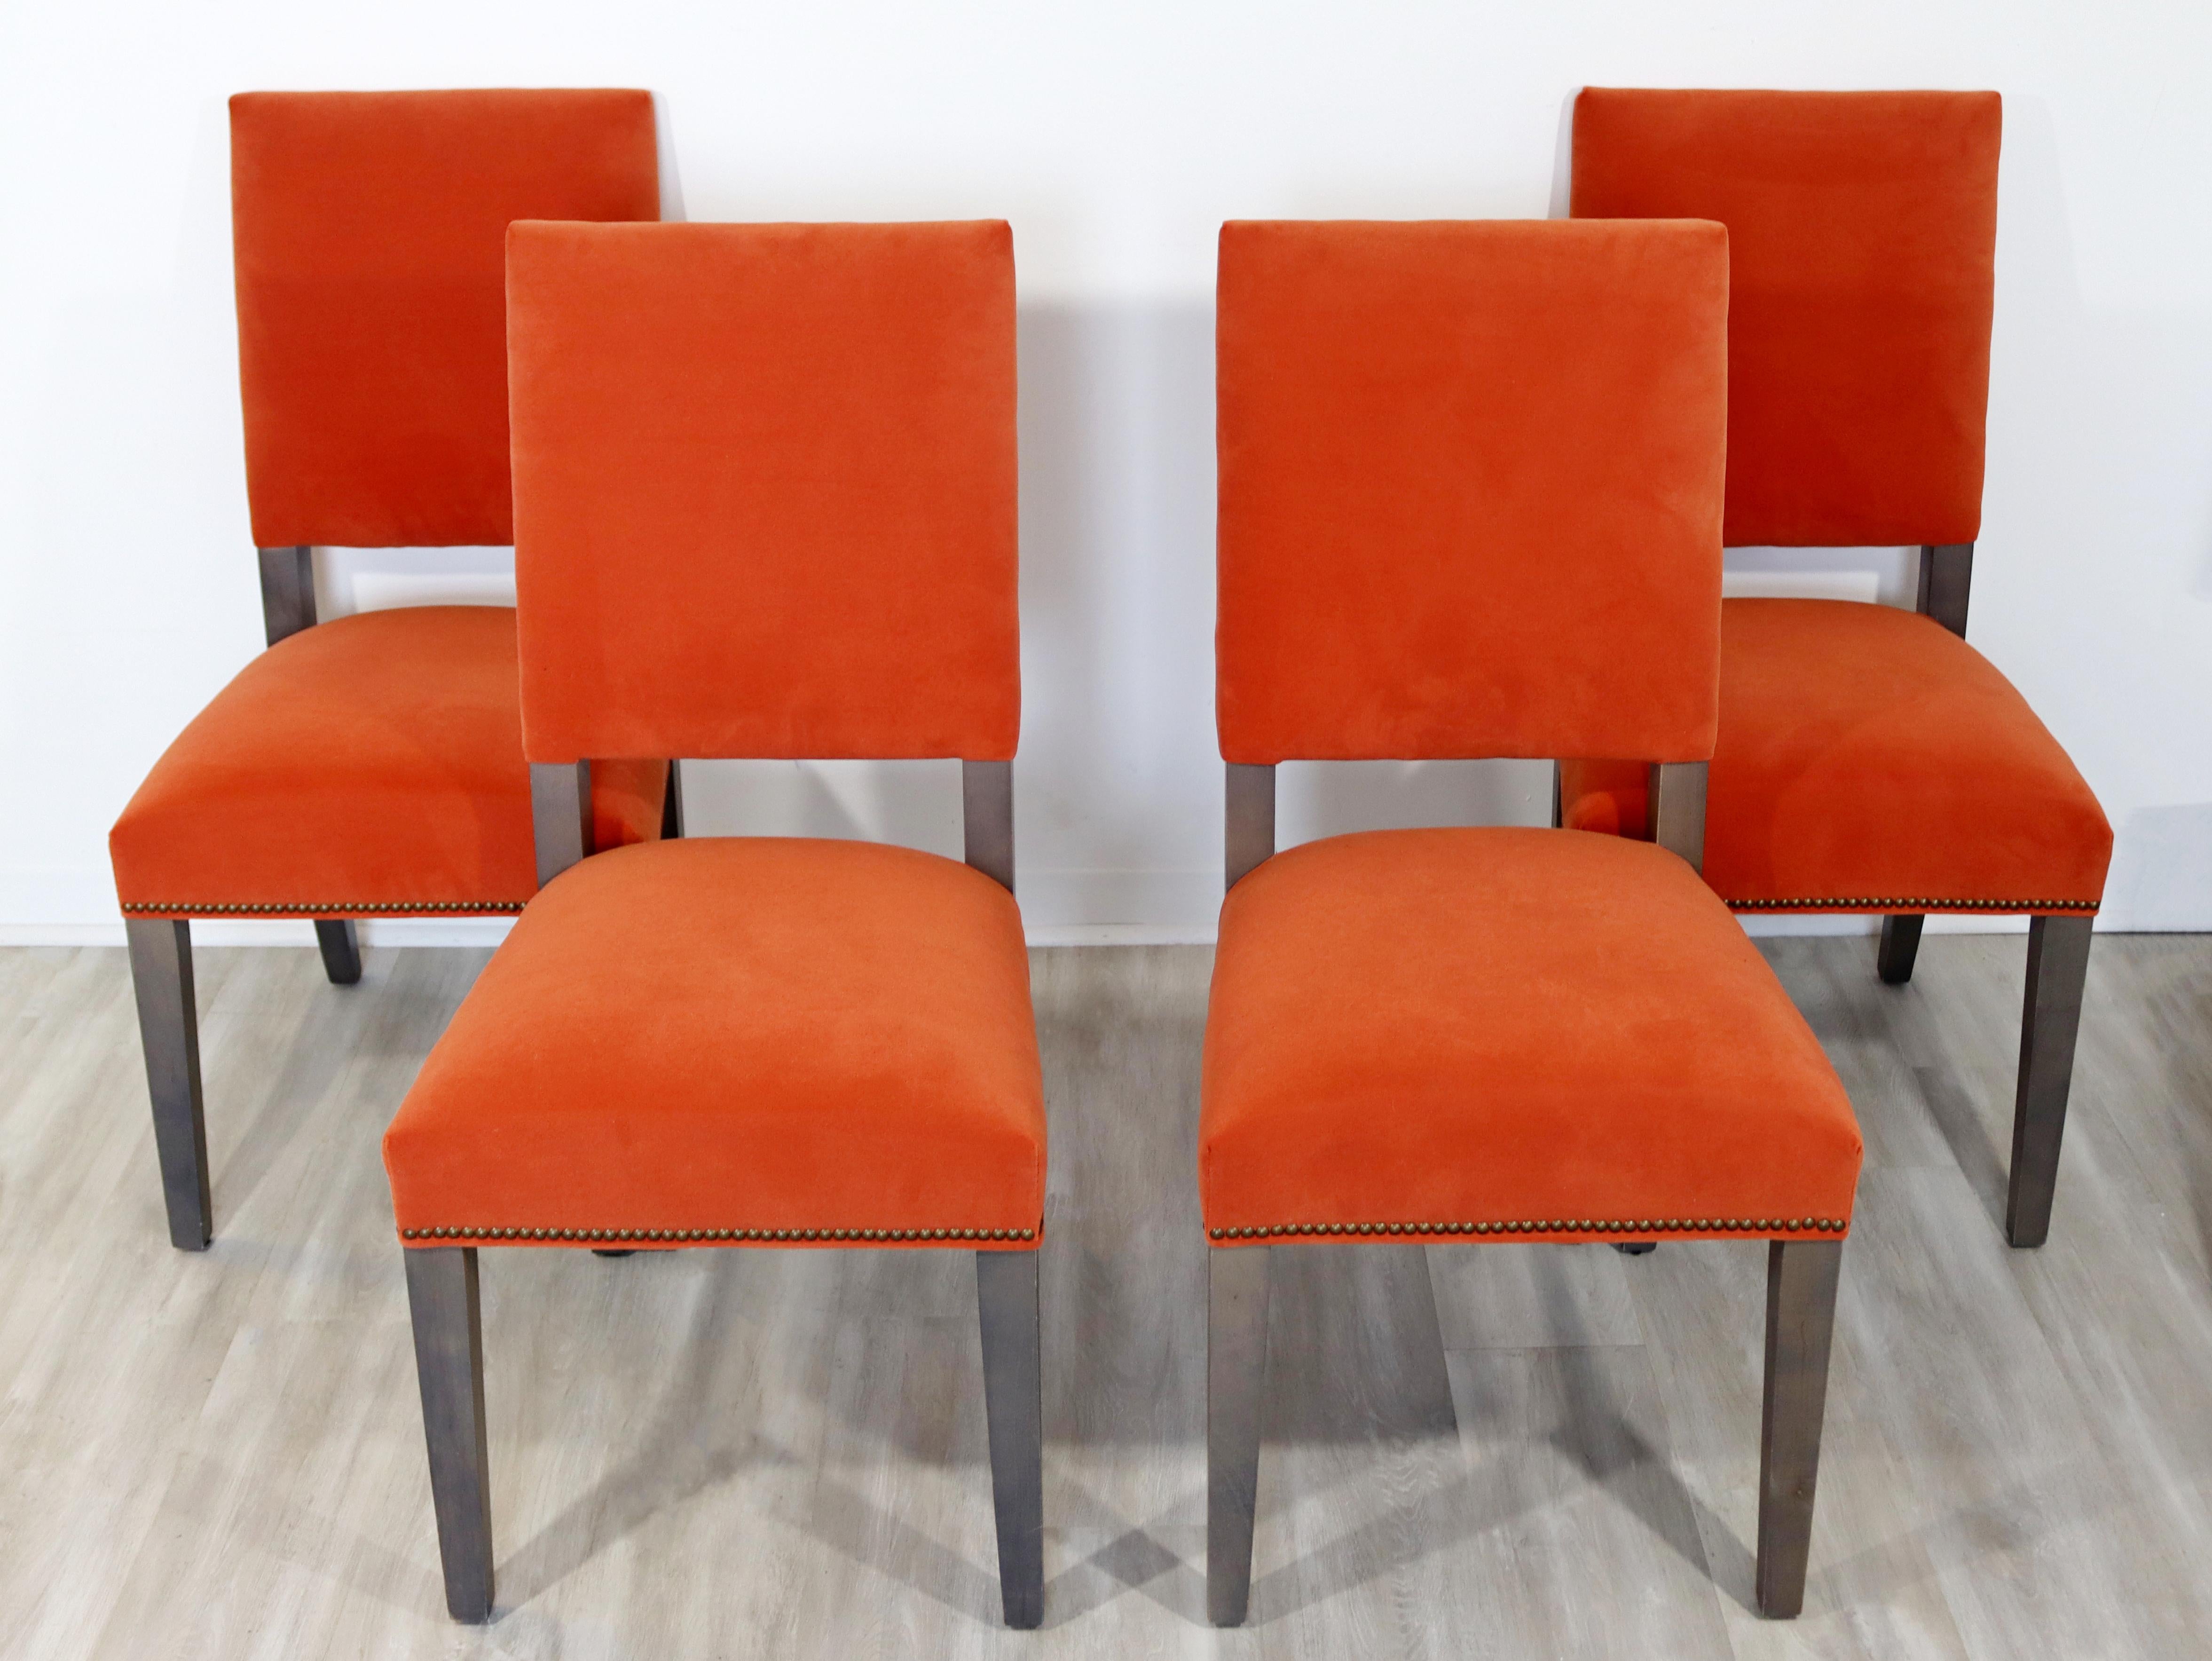 For your consideration is a gorgeous set of four side dining chairs, from the Camden Collection, in the Parsons style. In excellent condition. The dimensions are 20